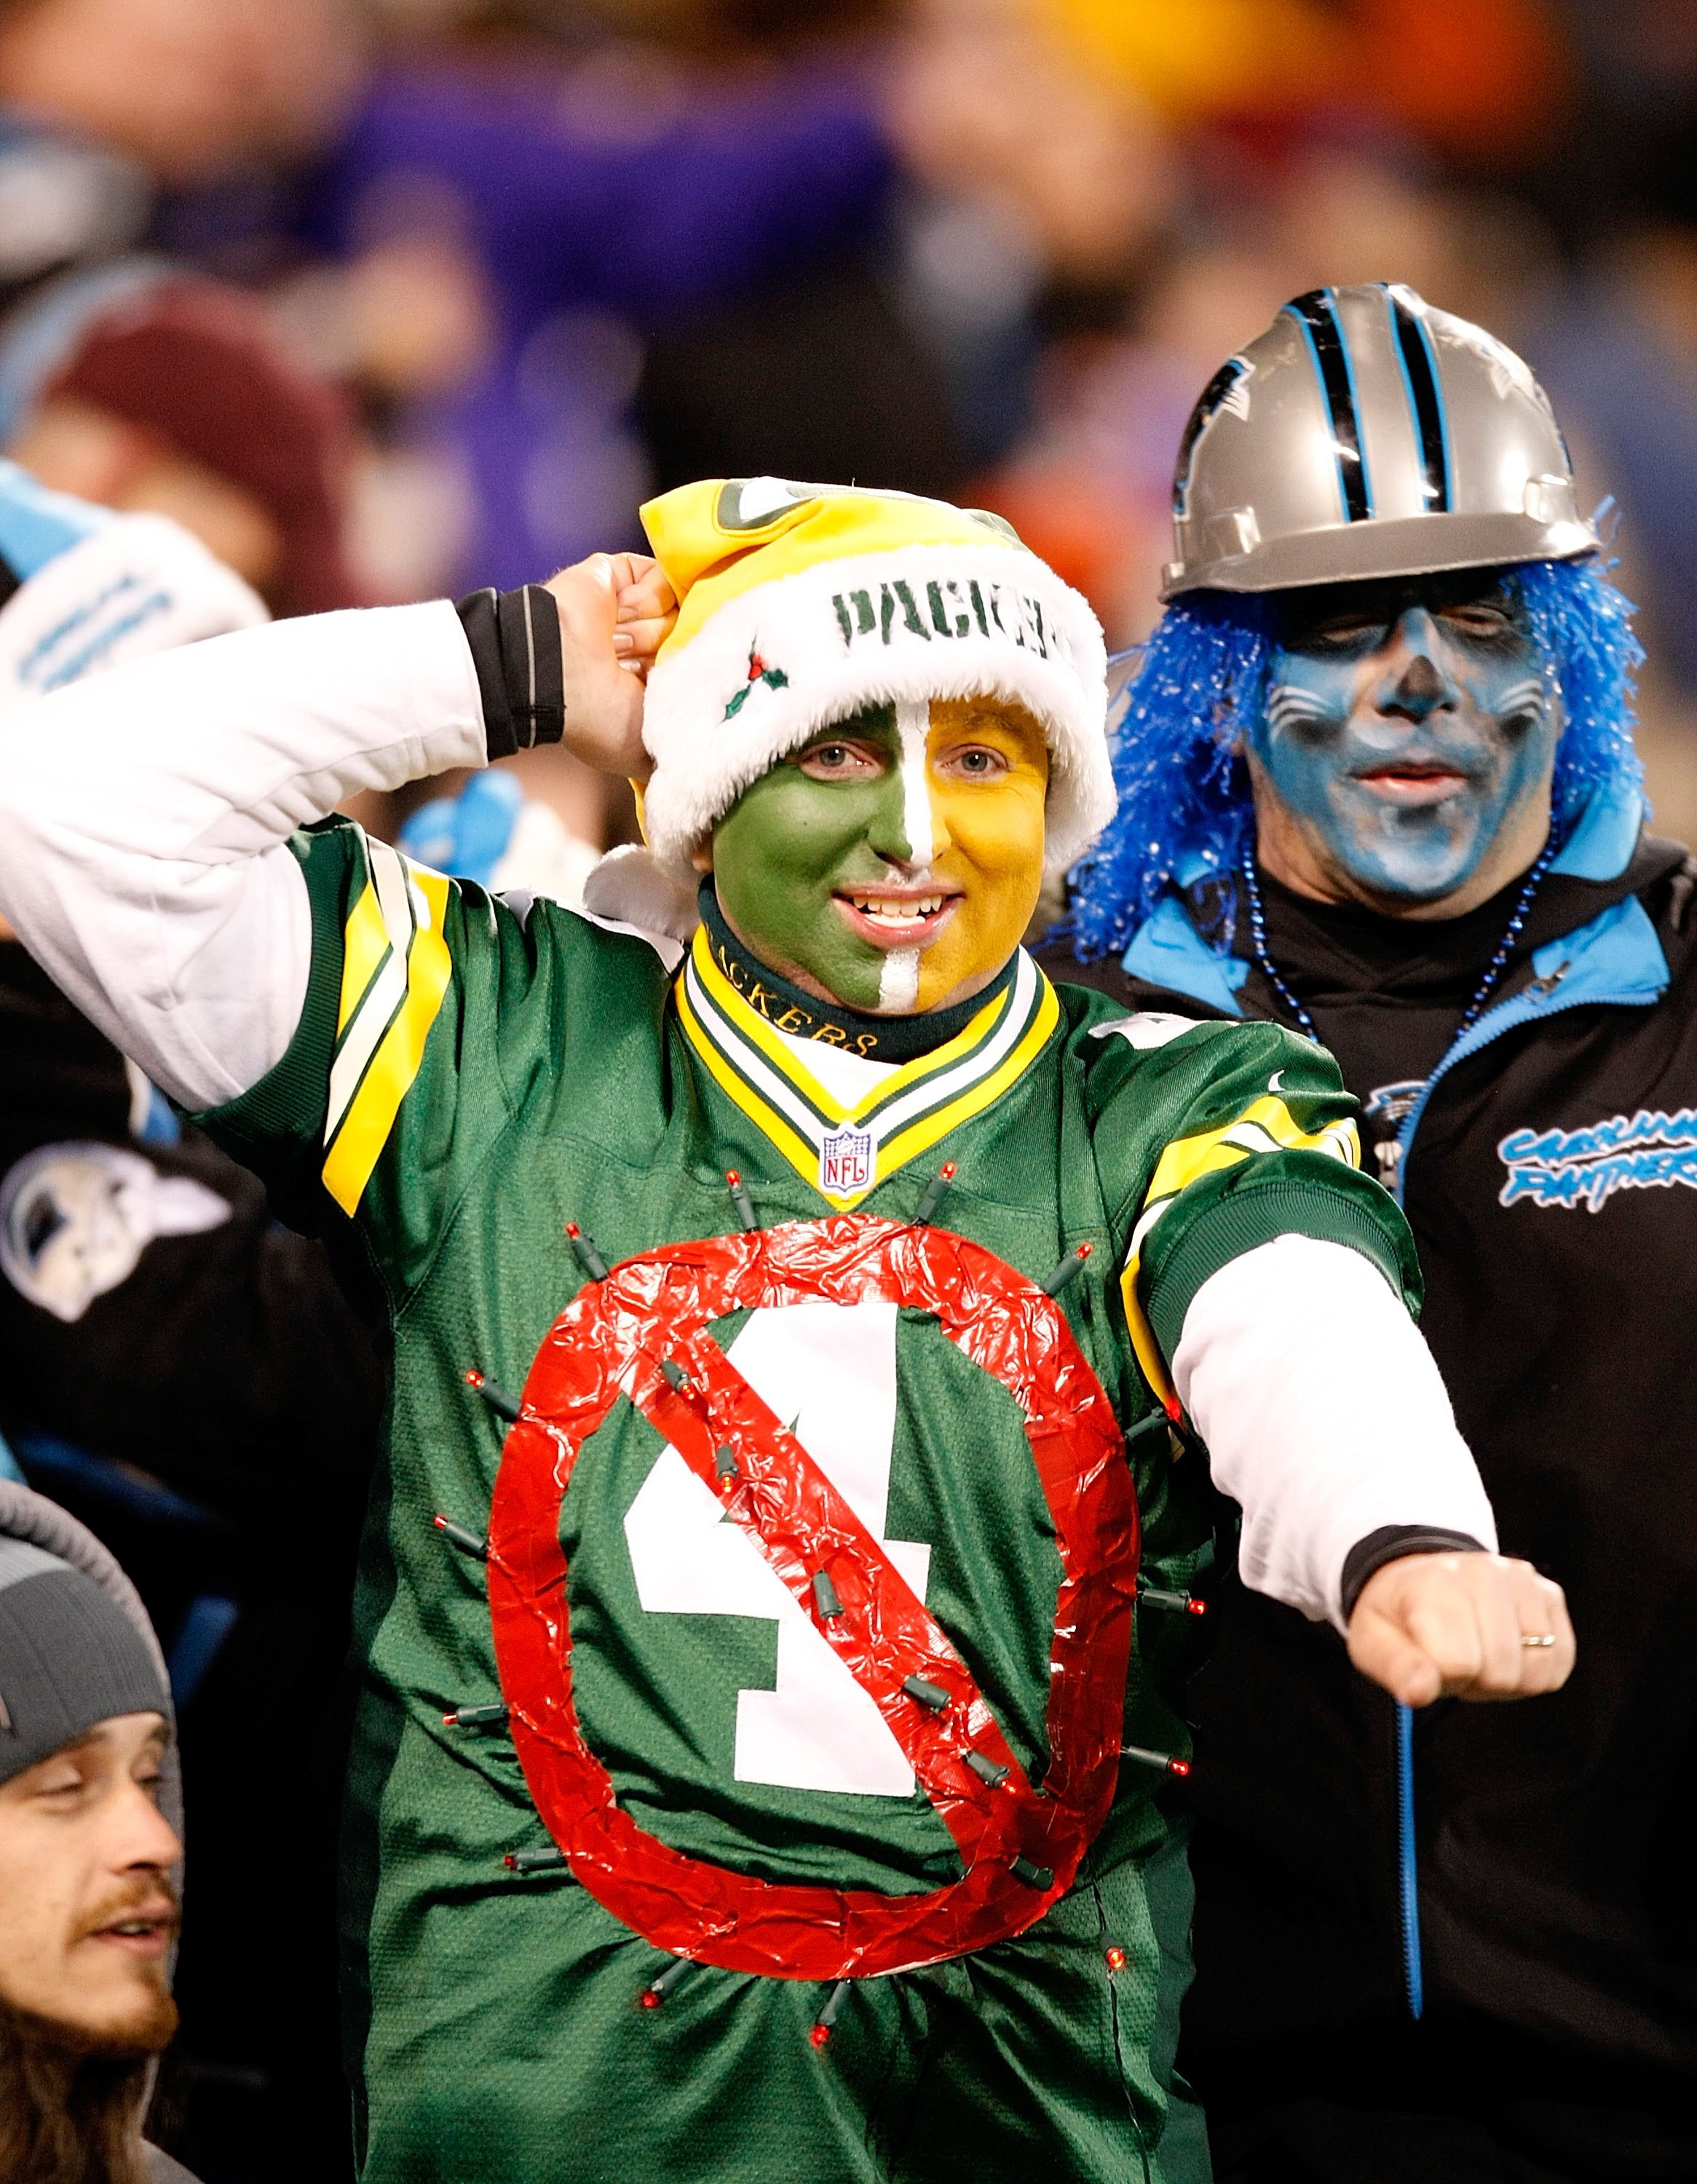 CHARLOTTE, NC - DECEMBER 20:  A Green Bay Packers fan wears an old jersey of quarterback Brett Favre (not pictured) #4 of the Minnesota Vikings during the game against the Carolina Panthers at Bank of America Stadium on December 20, 2009 in Charlotte, Nor